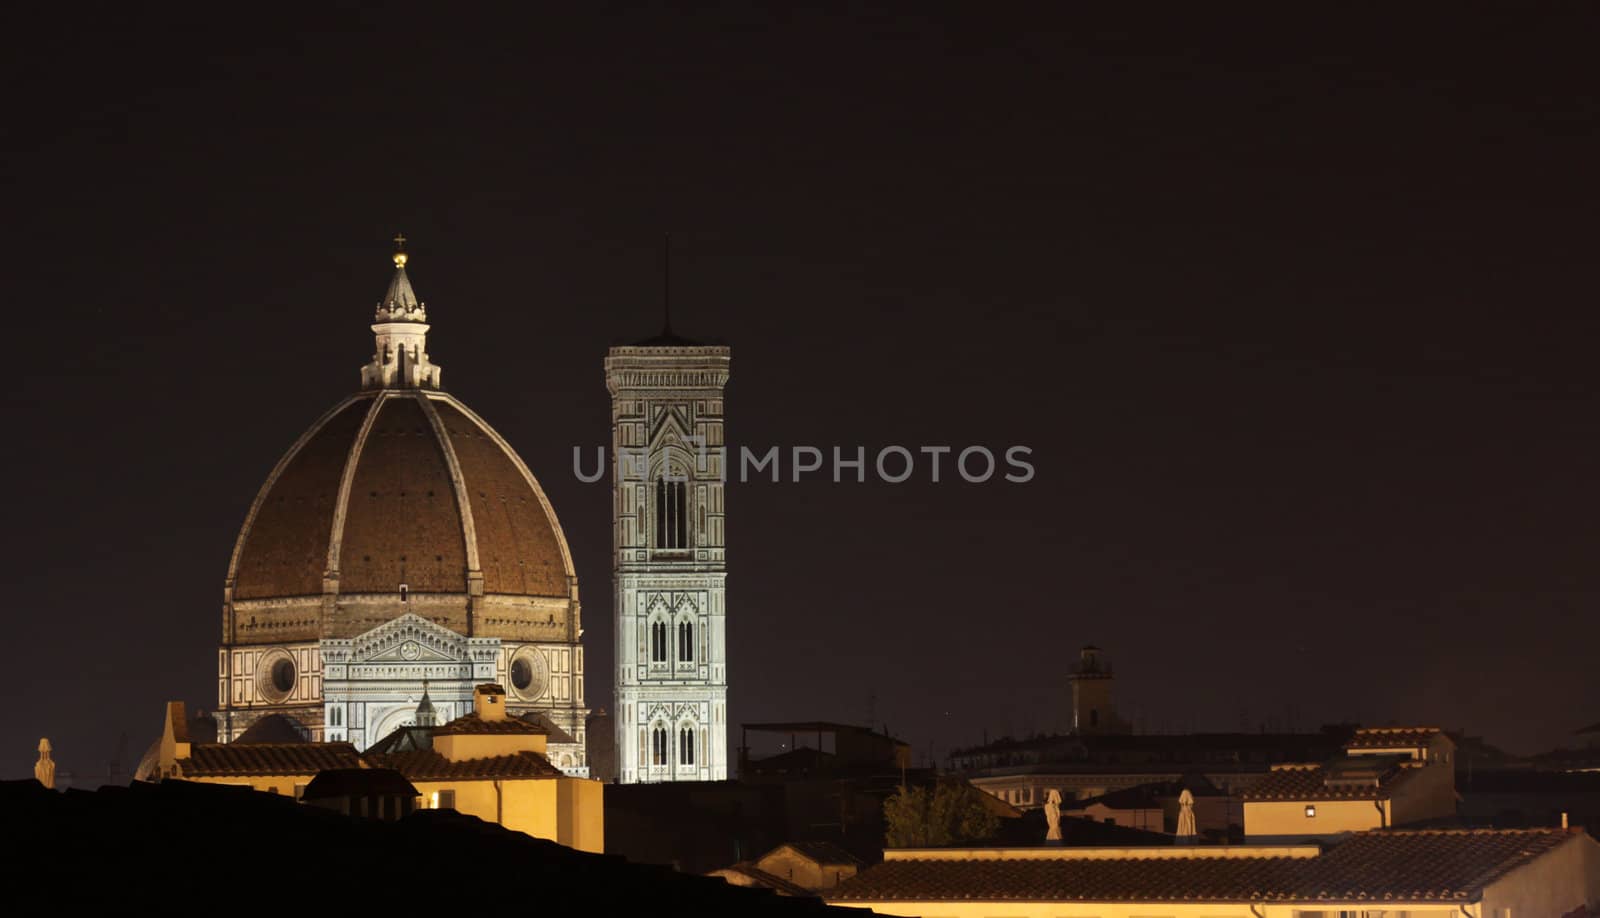 The skyline of Florence, Italy at night.  Featuring the Duomo and Giotto's Bell tower.